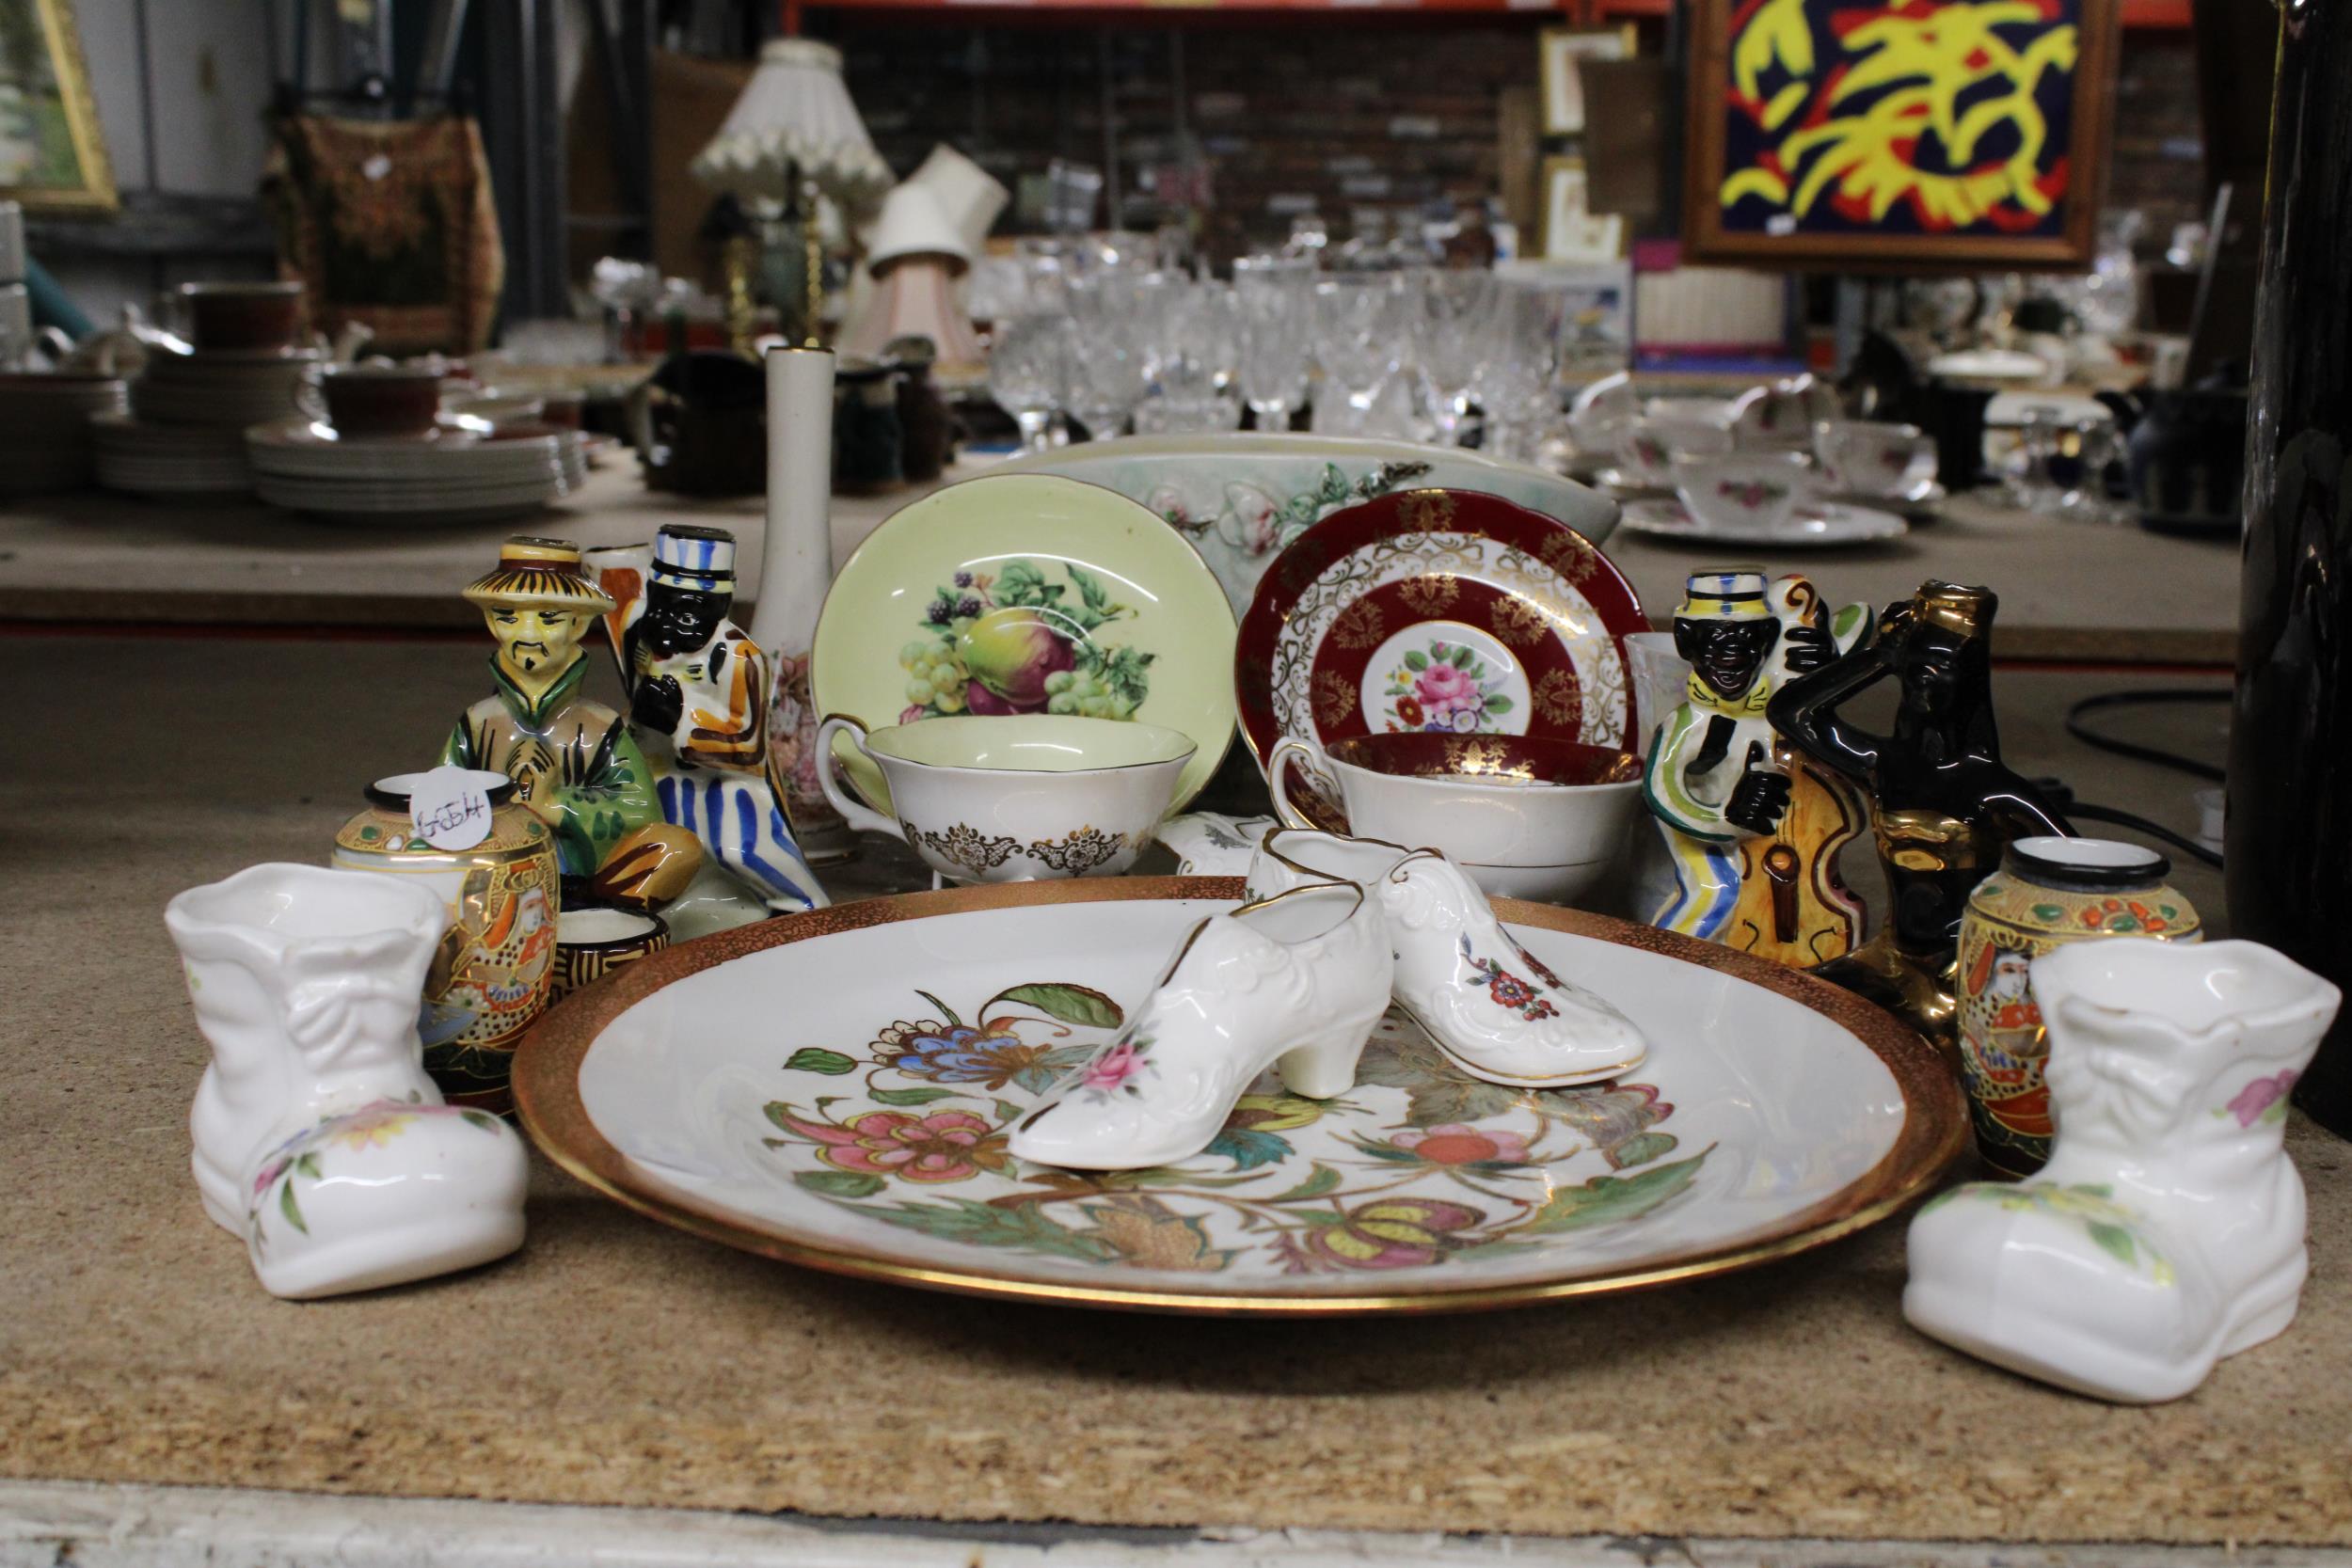 A MIXED CERAMIC LOT TO INCLUDE ROYAL GRAFTON CUPS AND SAUCERS, FIGURES, A BOWL, LARGE PLATE, ETC